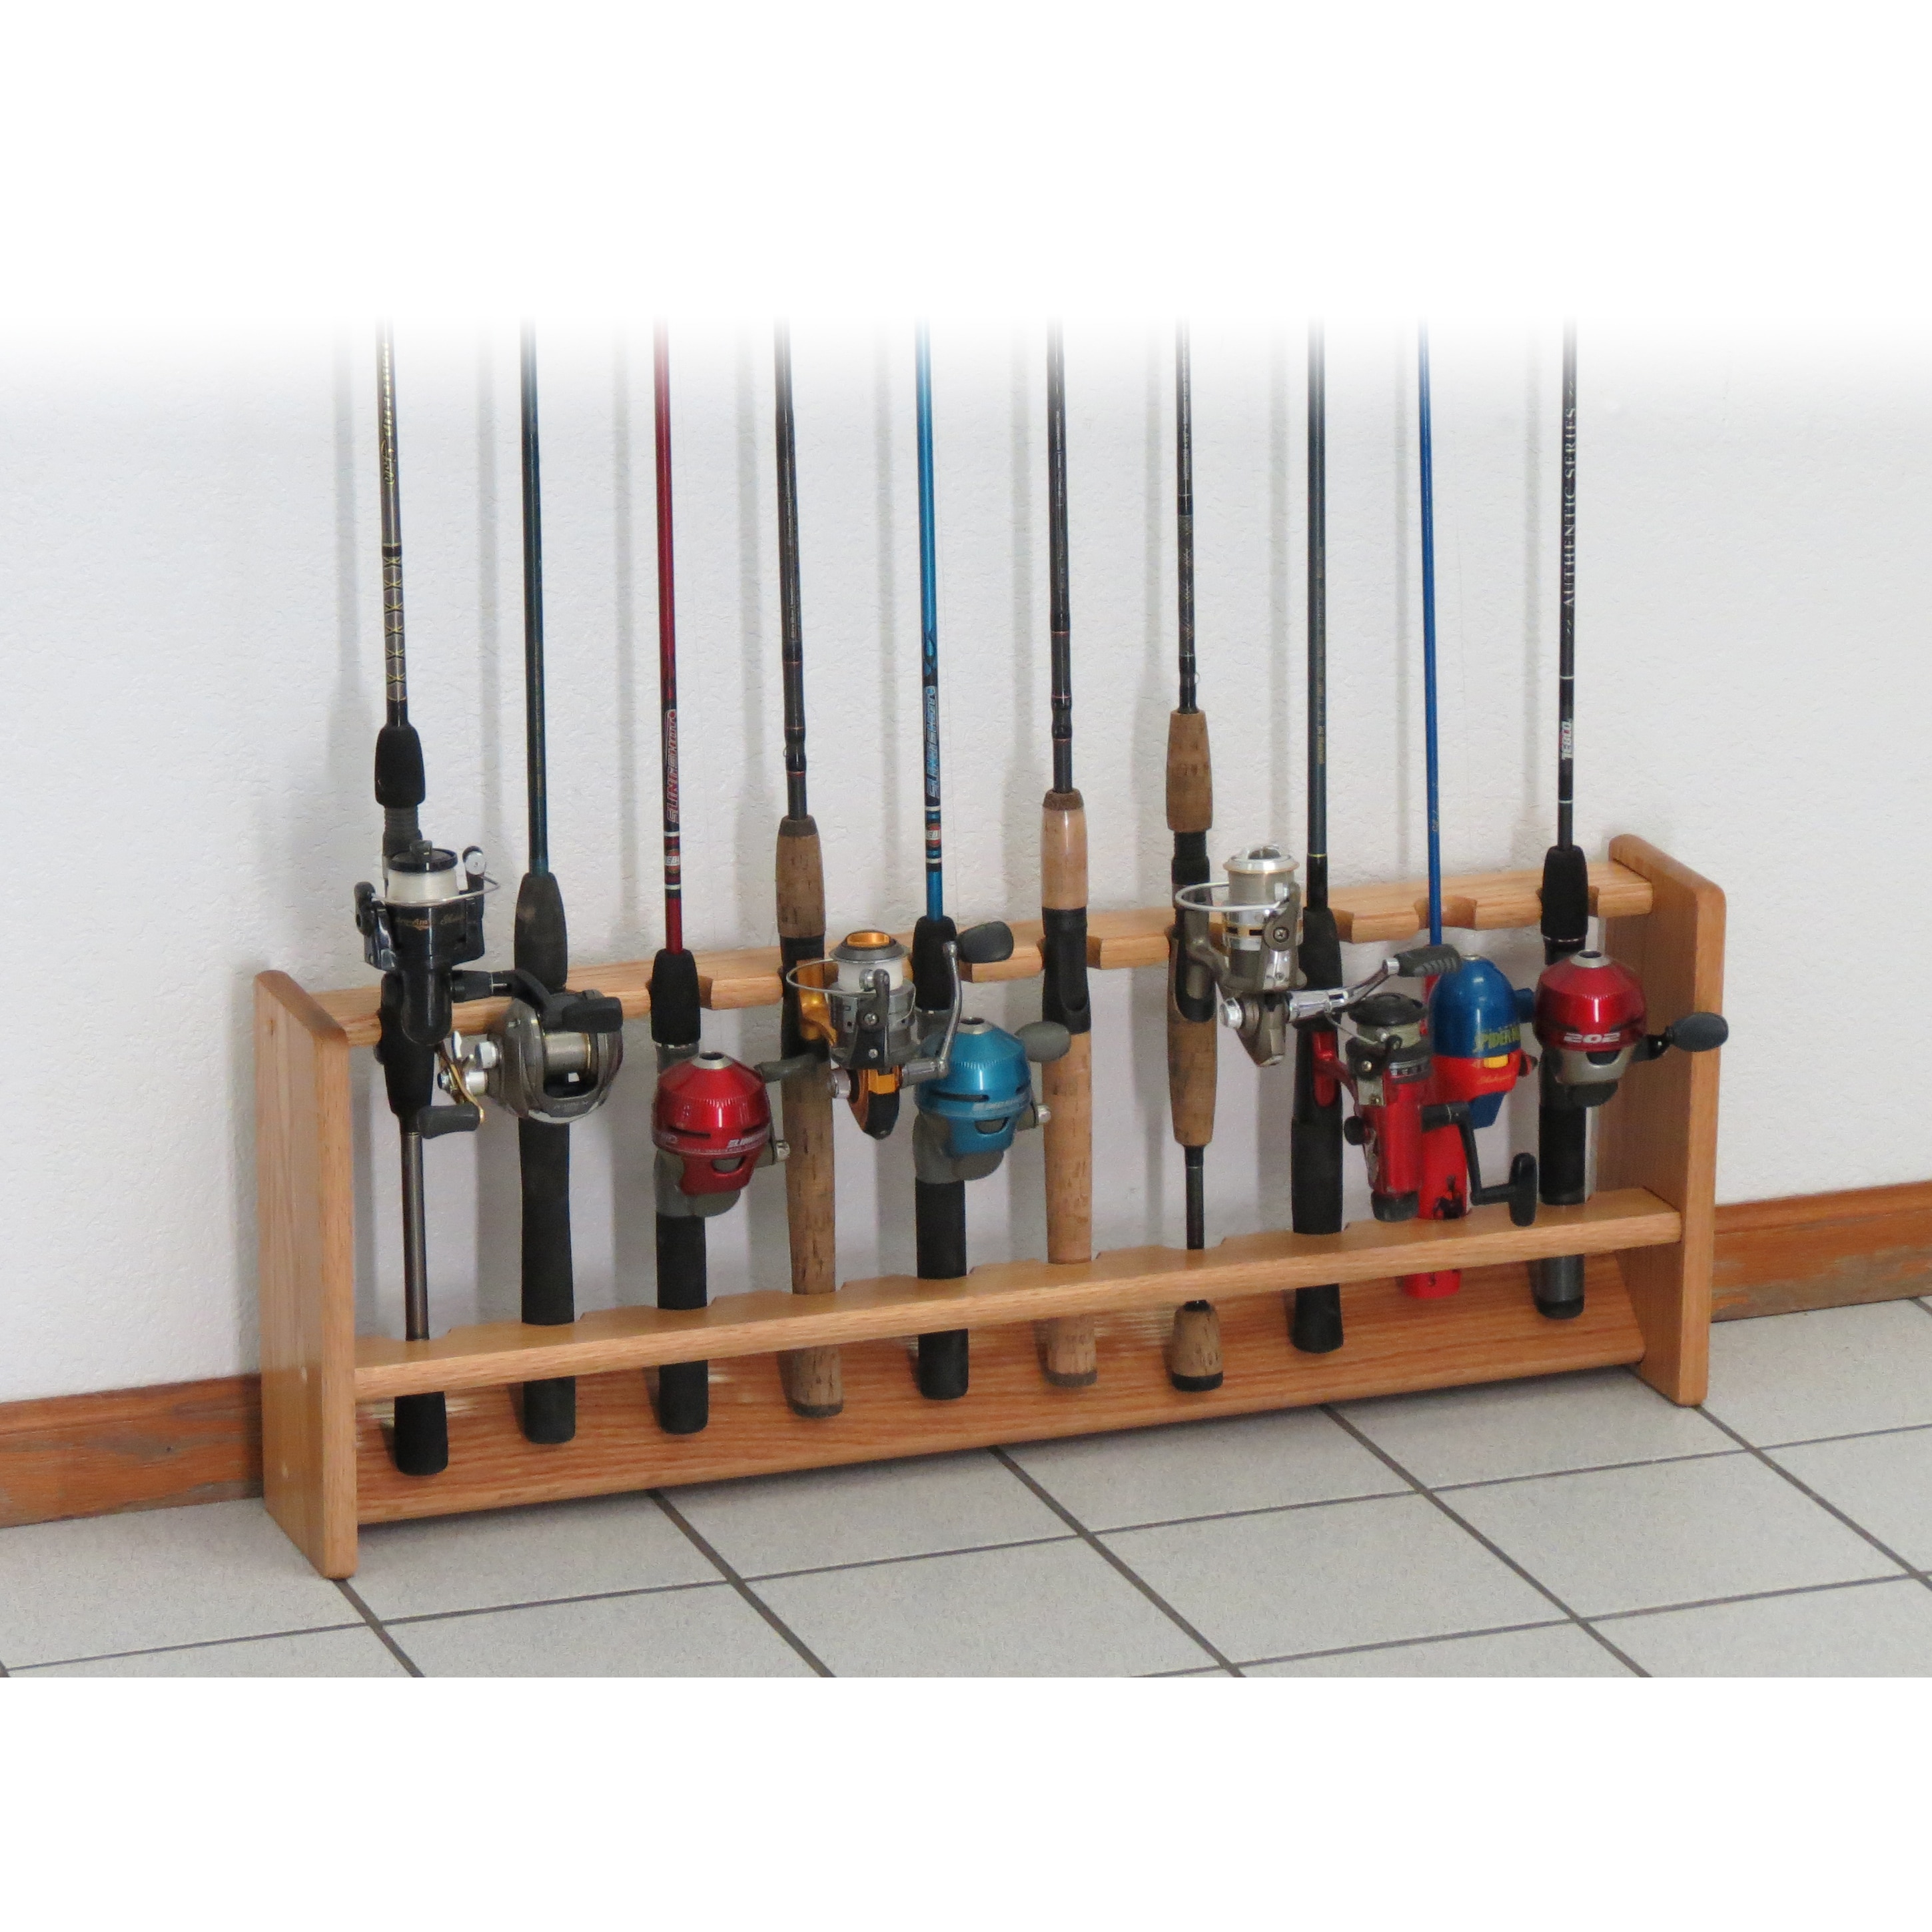 Fishing Rod Rack 10 Rods 4 Finish Options Free Shipping Today